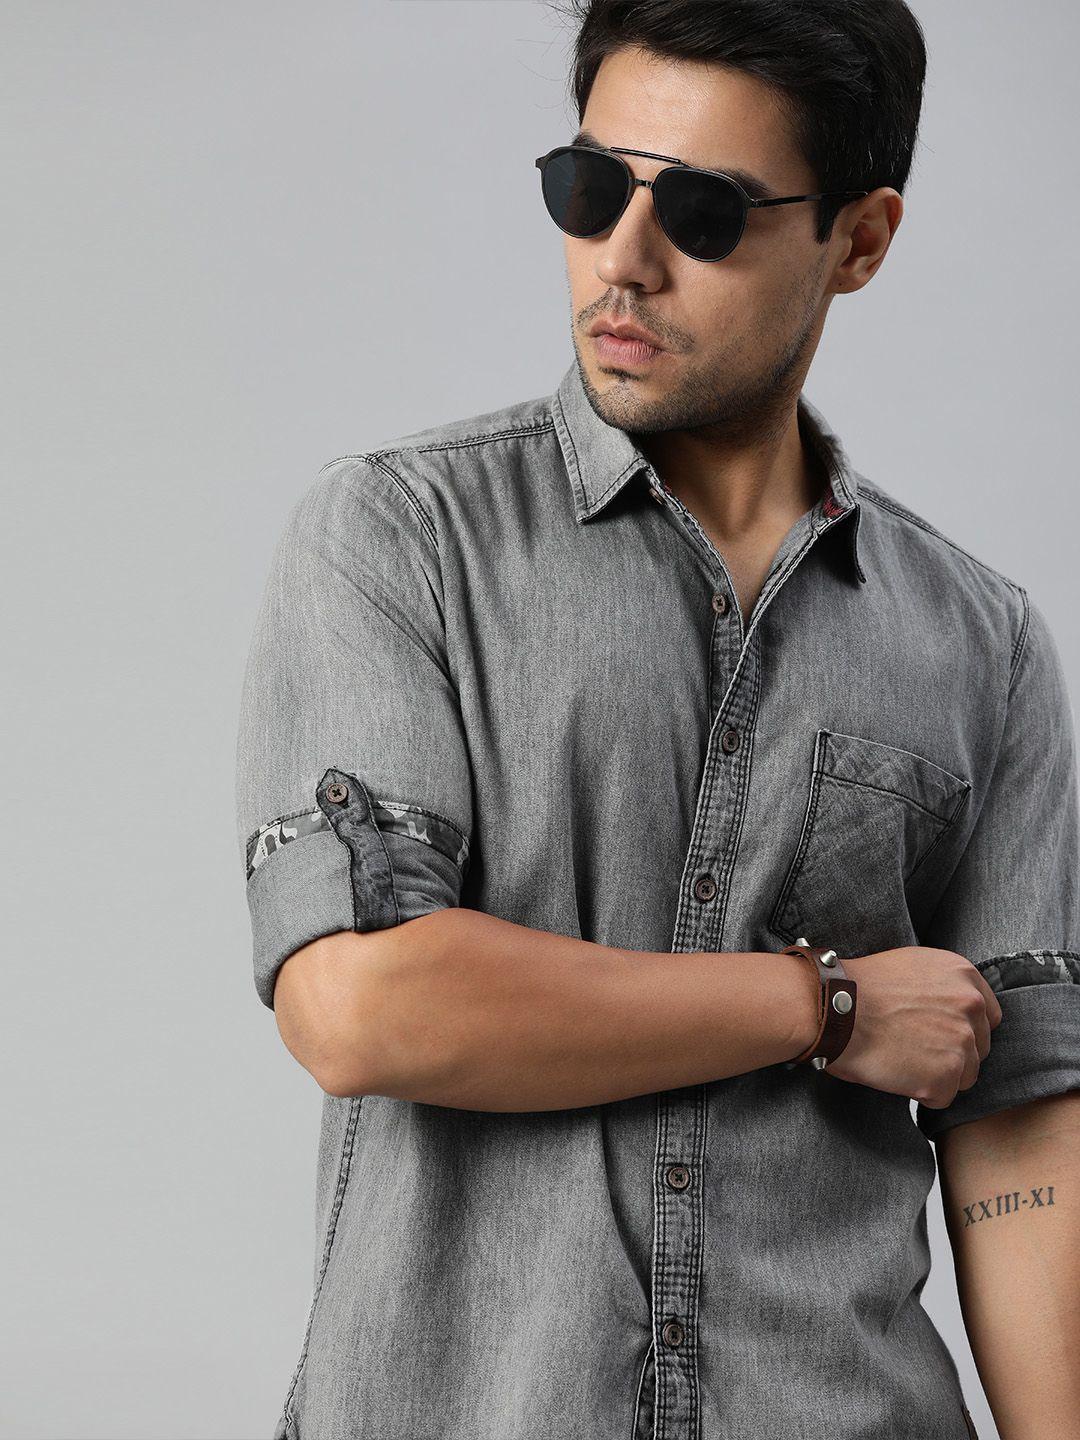 the-roadster-lifestyle-co-men-grey-regular-fit-faded-chambray-casual-sustainable-shirt